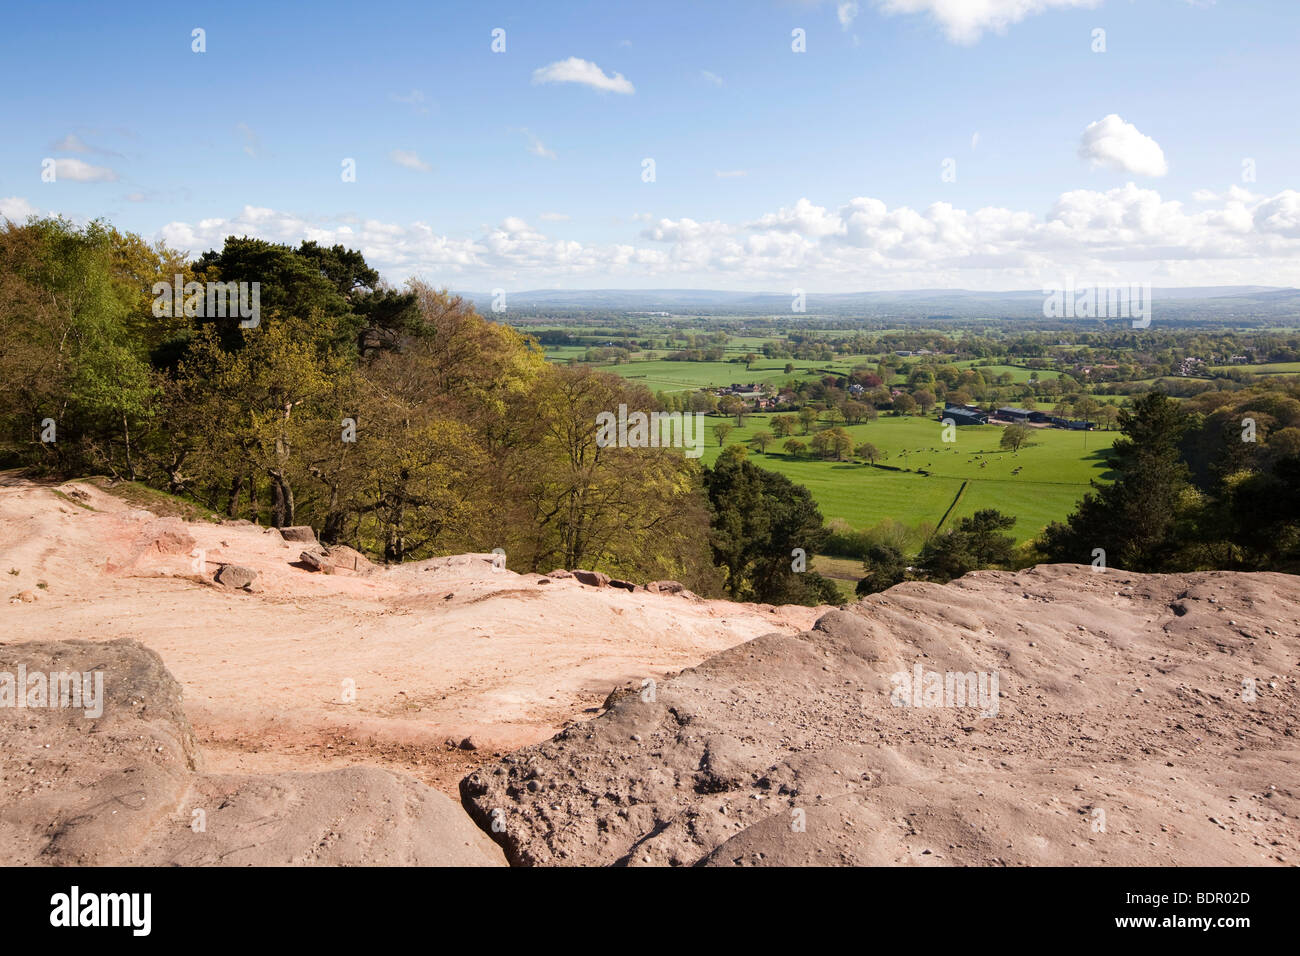 UK, England, Cheshire, Alderley Edge, view of Manchester and Lancashire hills from the edge Stock Photo